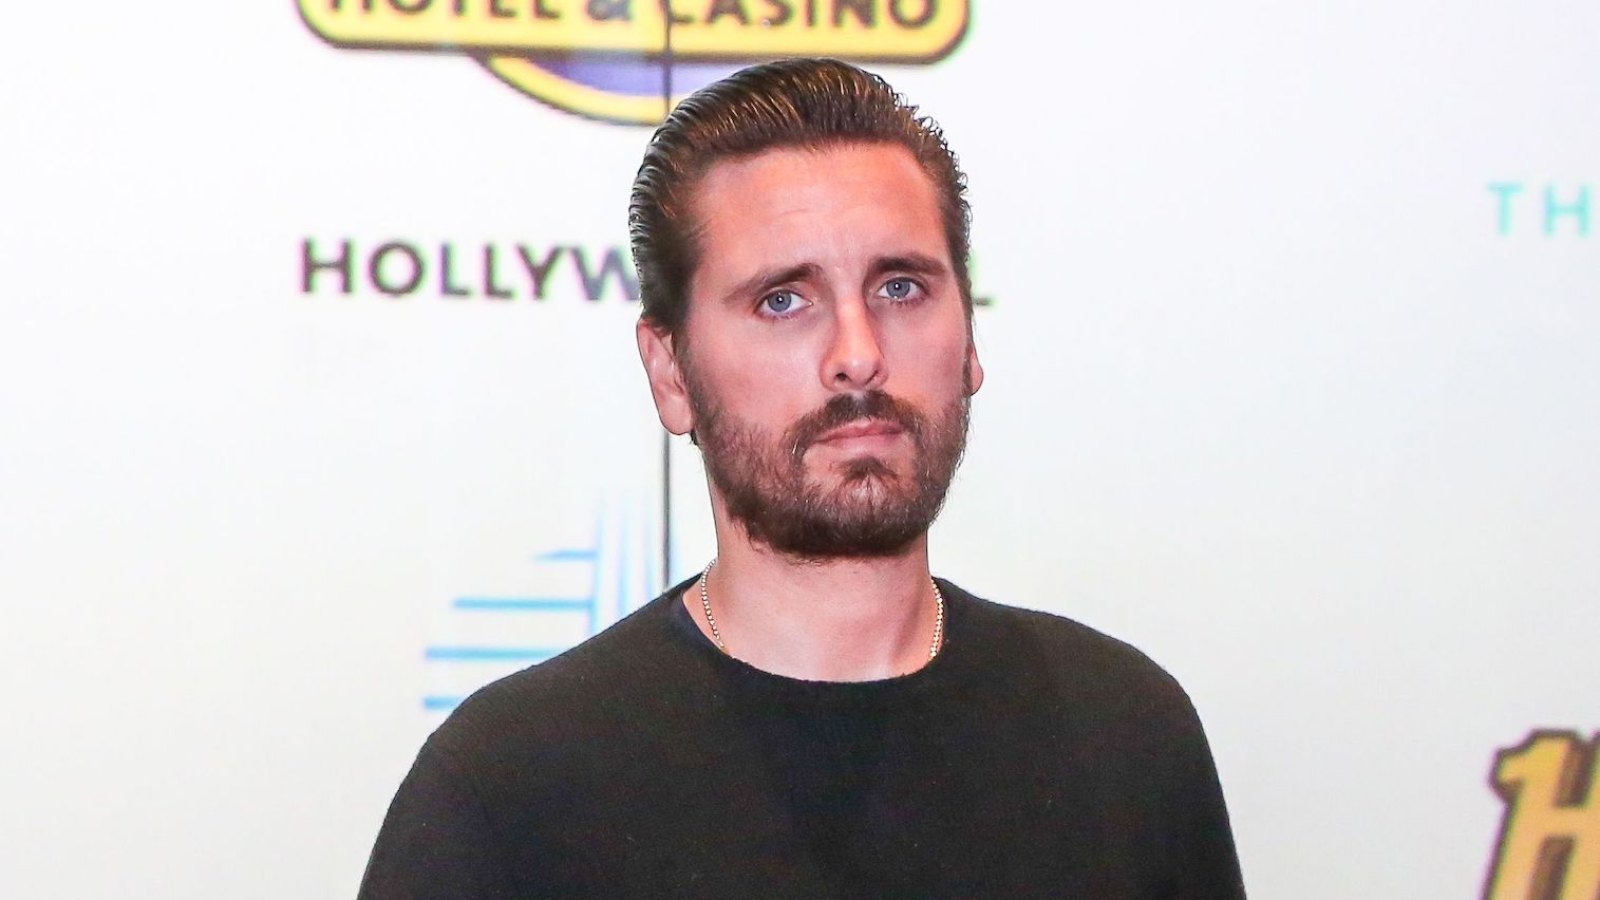 Scott Disick Reveals His Back Issues From a Car Accident Got Worse Because of a Motorcycle Incident